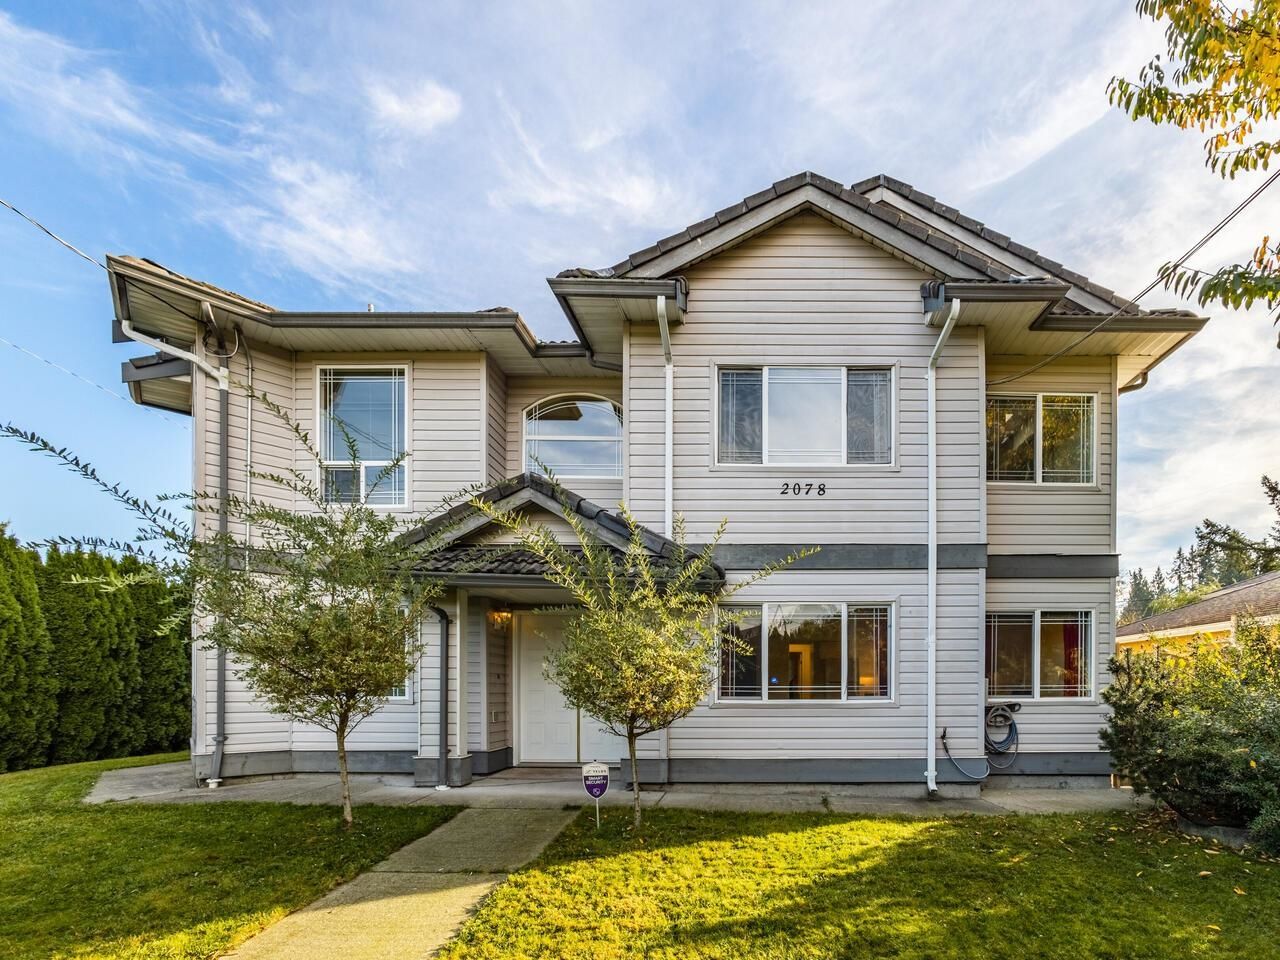 New property listed in Mary Hill, Port Coquitlam